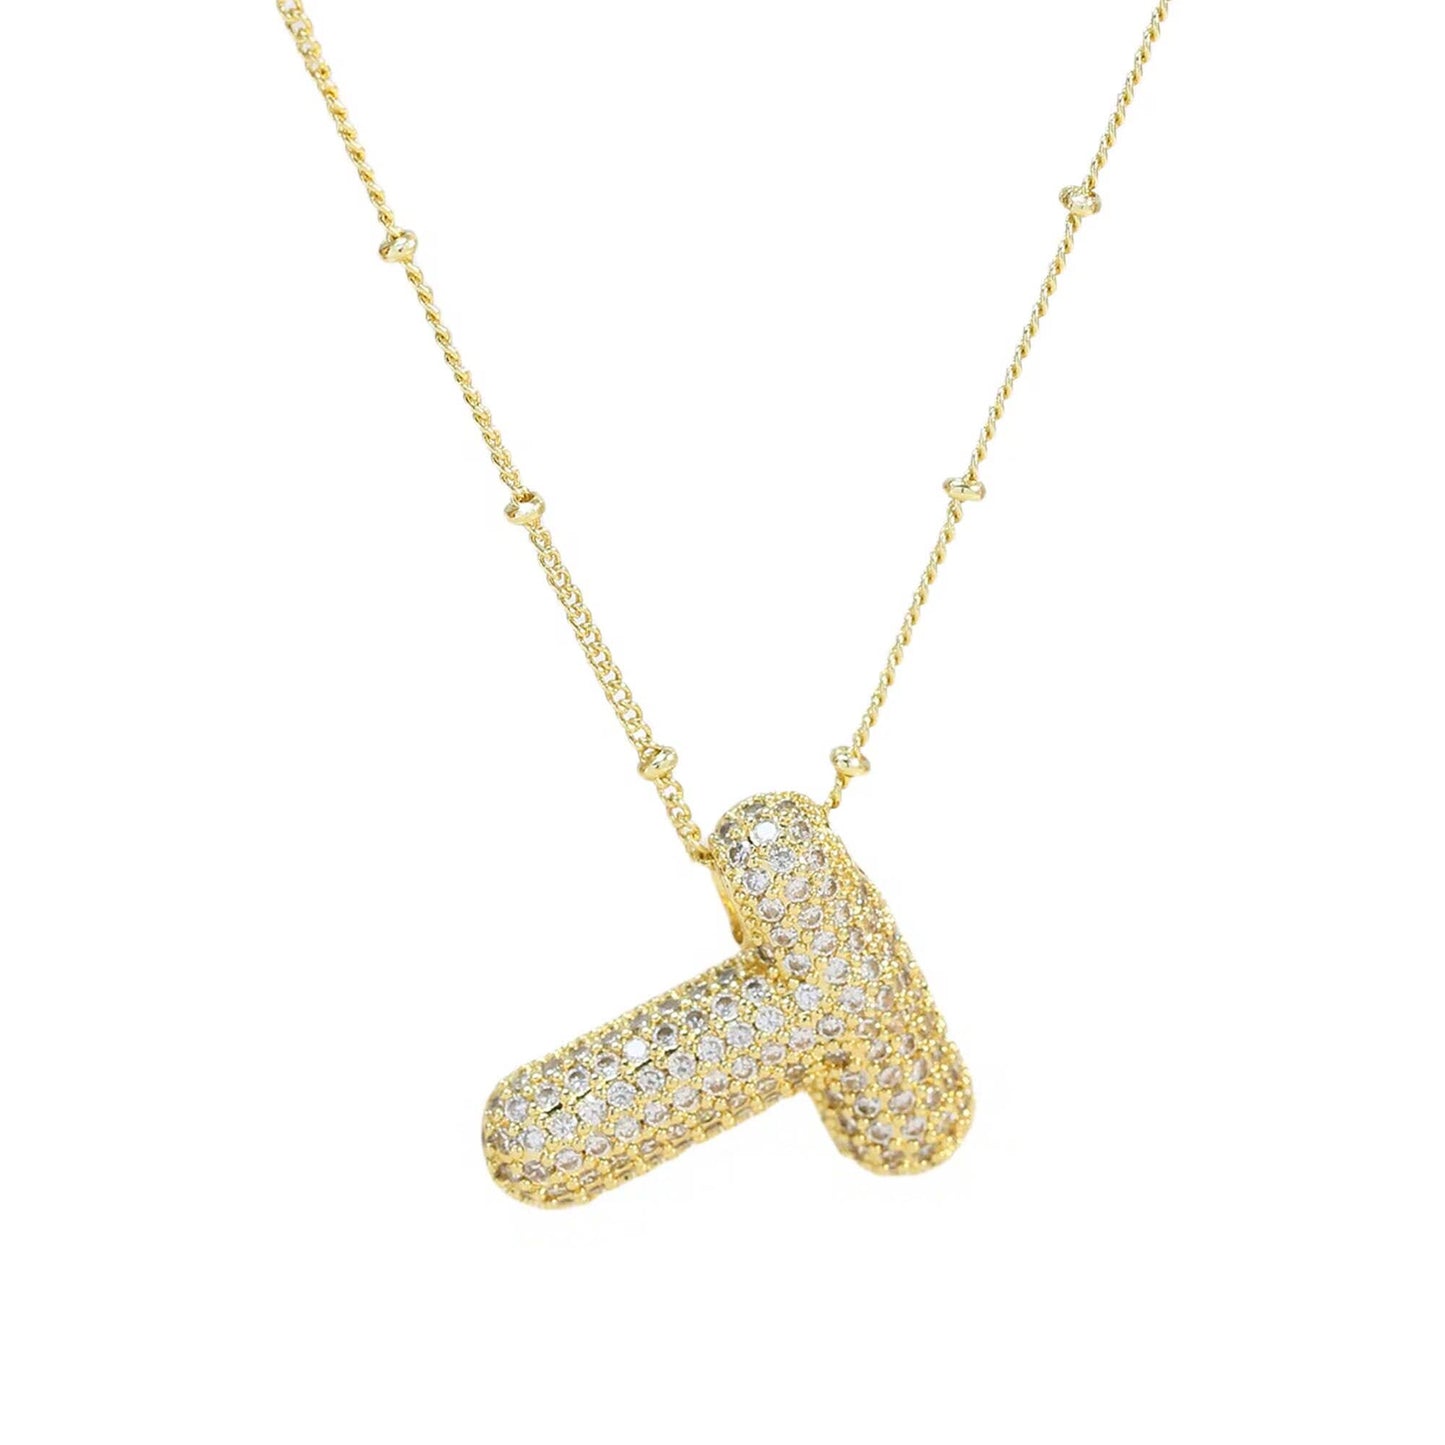 Initial CZ Balloon Bubble 18K Gold Necklace: A